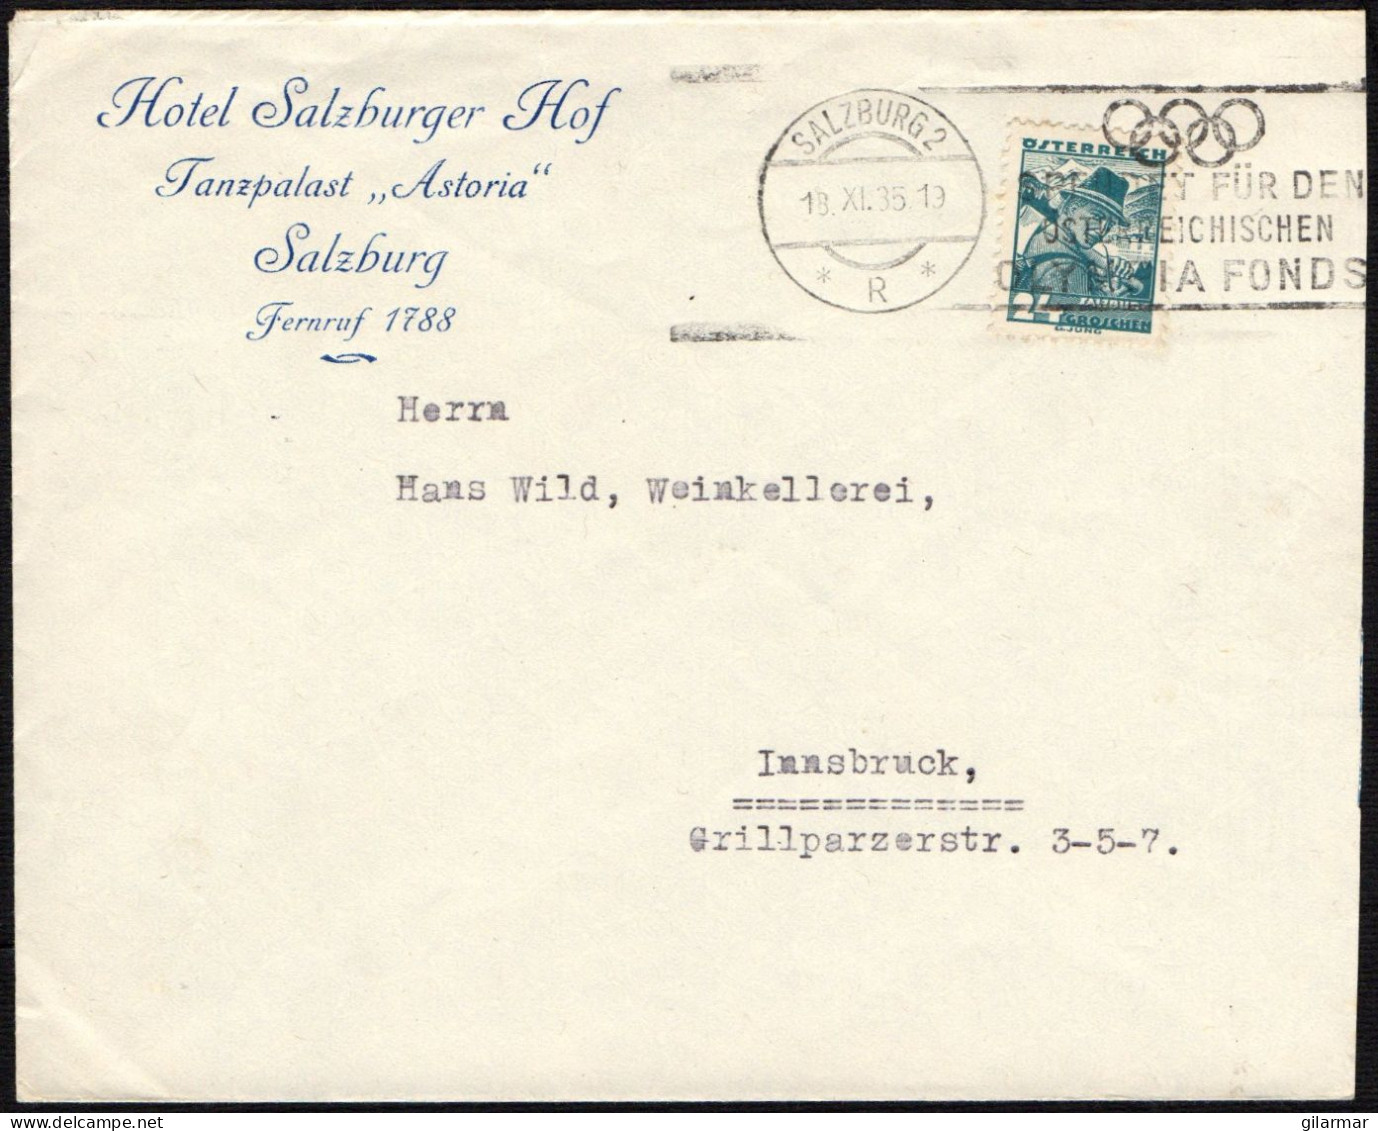 OLYMPIC GAMES 1936 - AUSTRIA SALZBURG 1935 - DONATE TO THE AUSTRIAN OLYMPIC FUND - MAILED ENVELOPE - M - Sommer 1936: Berlin